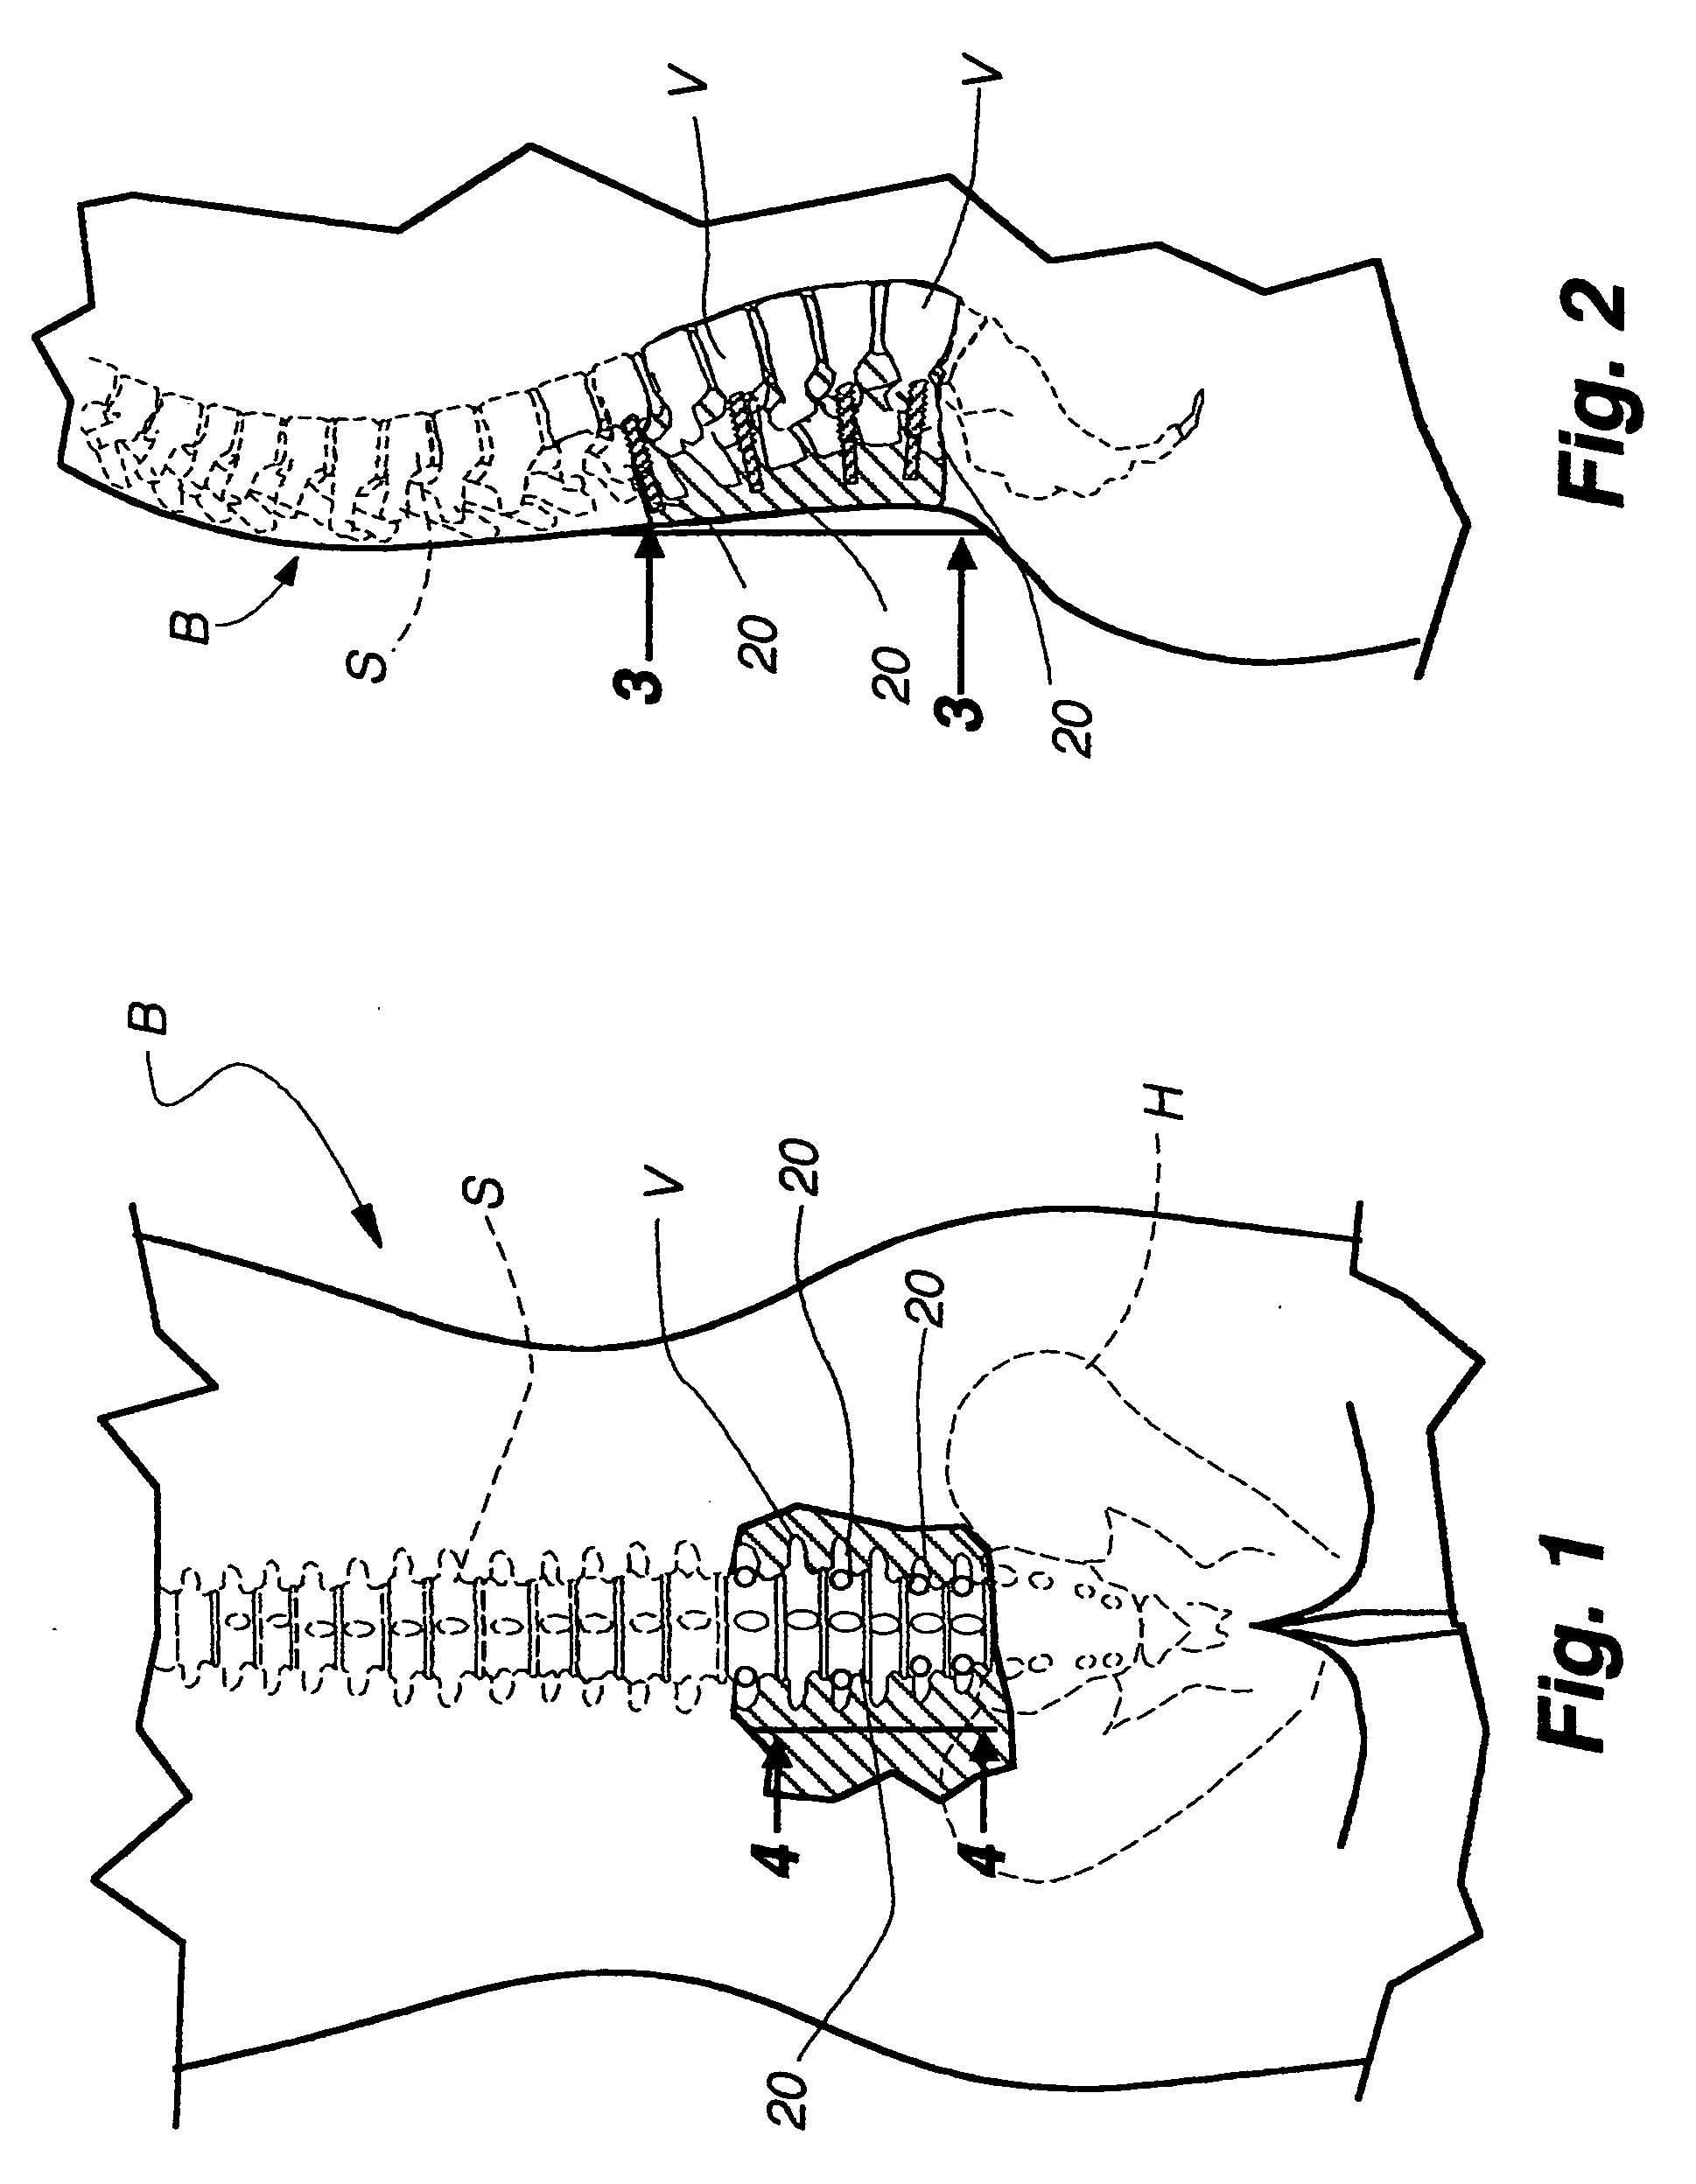 Minimally invasive pedicle screw and guide support